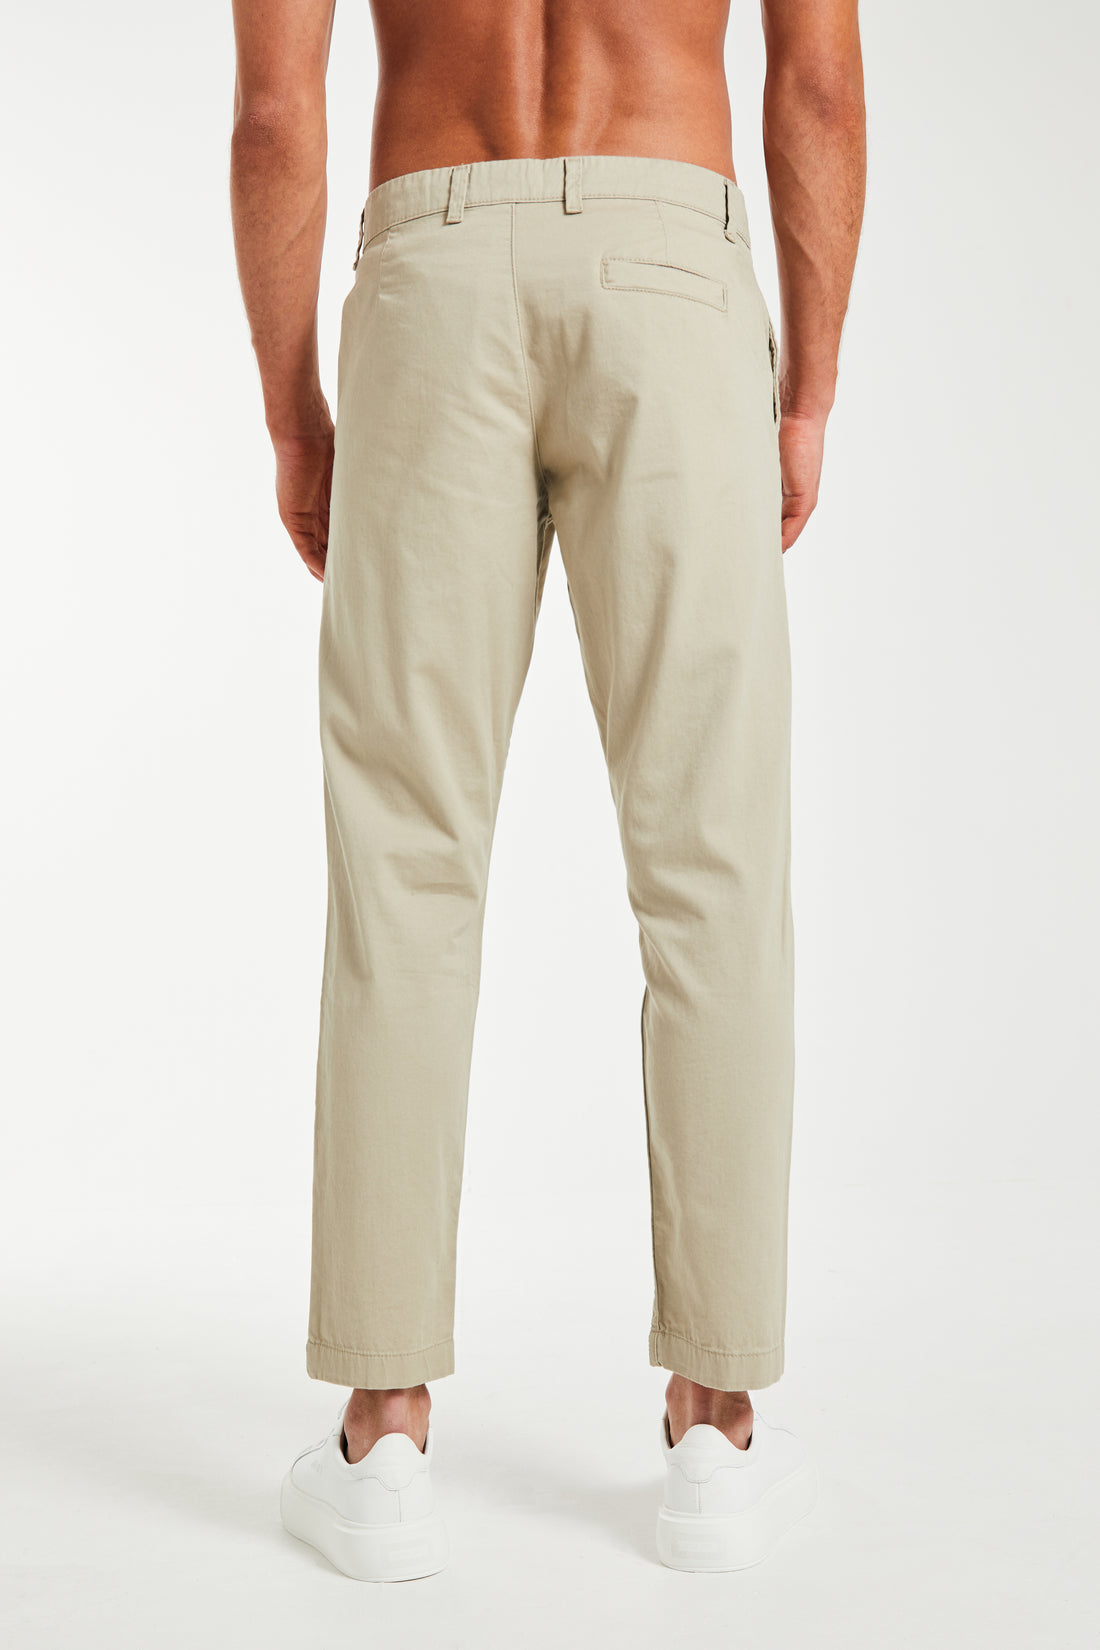 back profile of cheap men's chinos in beige